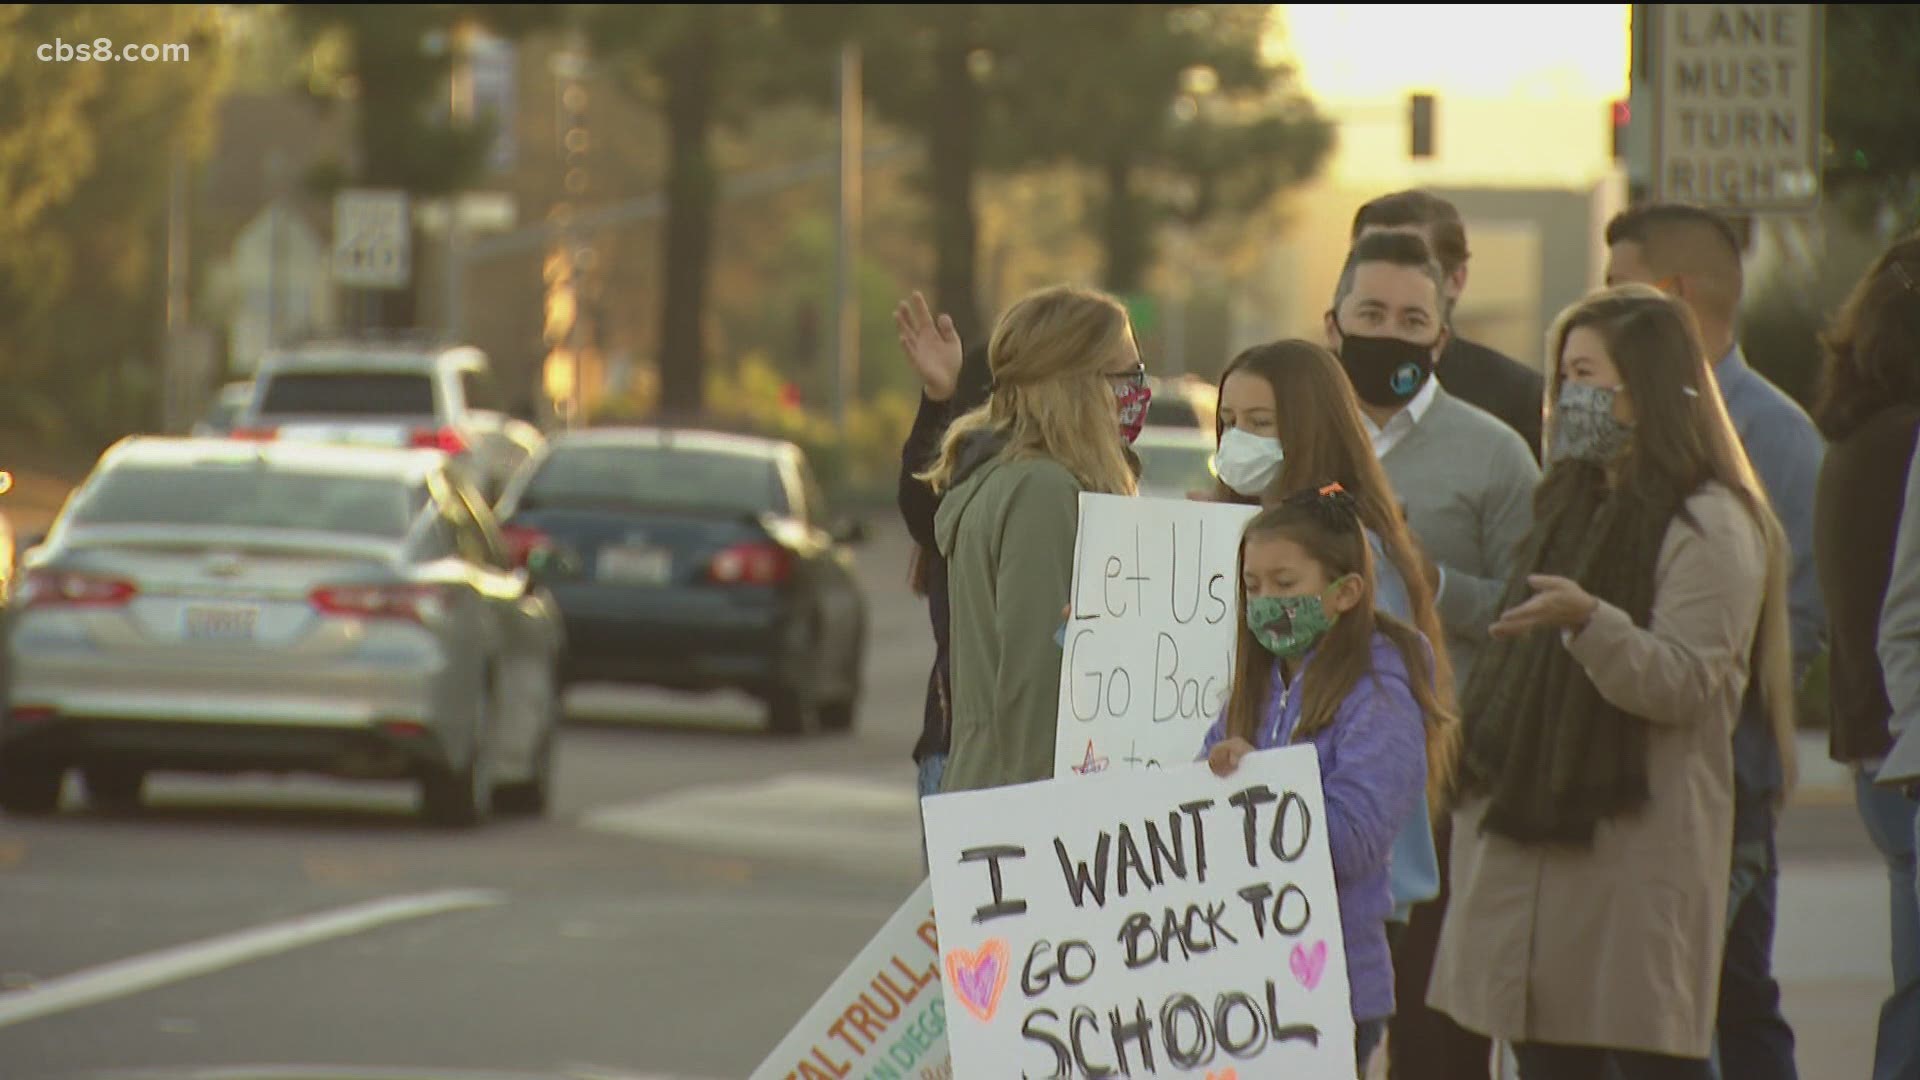 San Diego City Councilman Chris Cate and parents with students in the San Diego Unified School District will hold a rally Thursday in front of Mira Mesa High School.